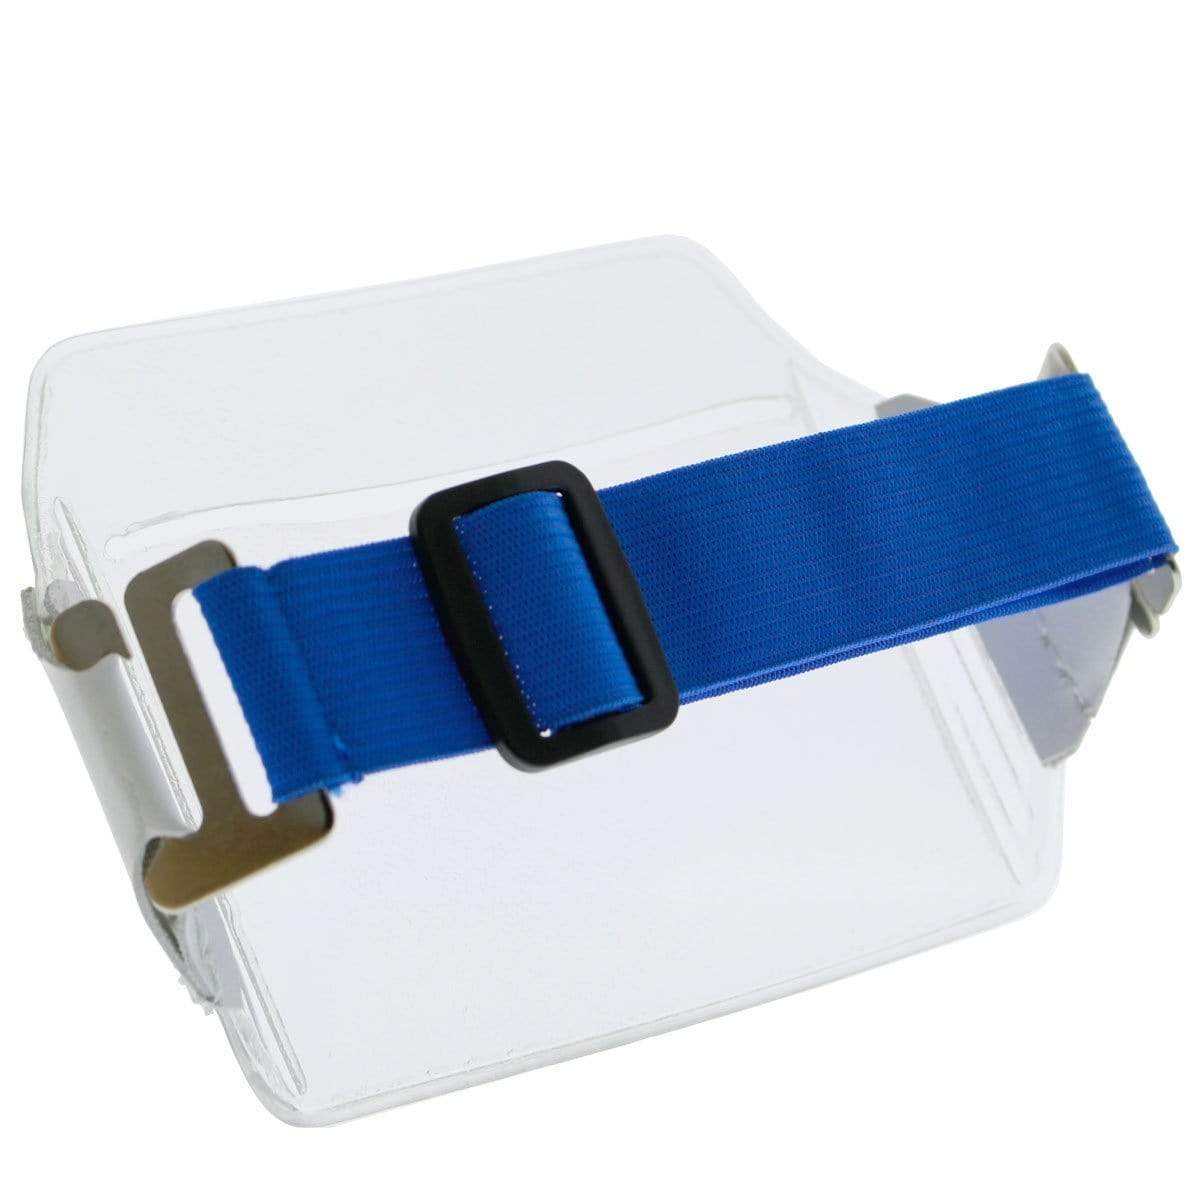 A Clear Over Size Vinyl Horizontal Arm Band Badge Holder (P/N 1840-7100) with a blue strap and black buckle wrapped around it.